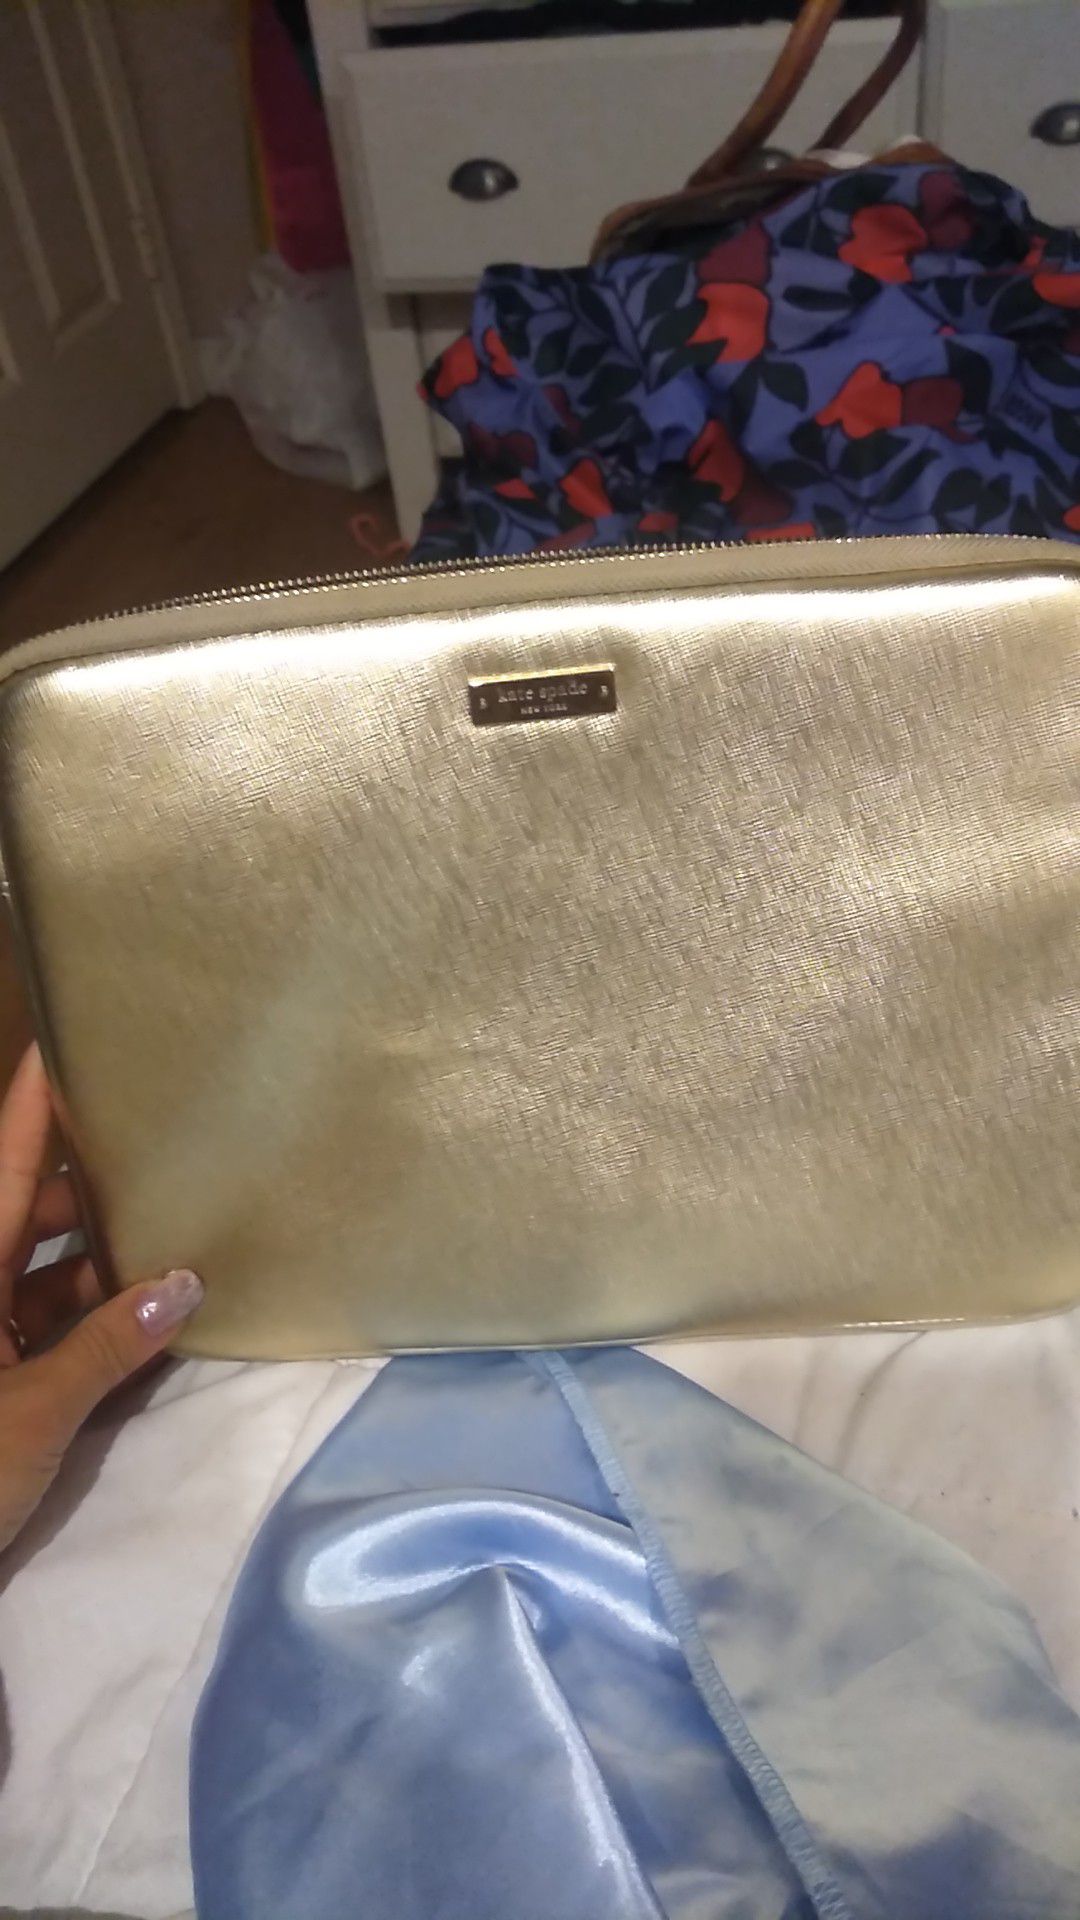 Kate Spade tablet or small lap top case